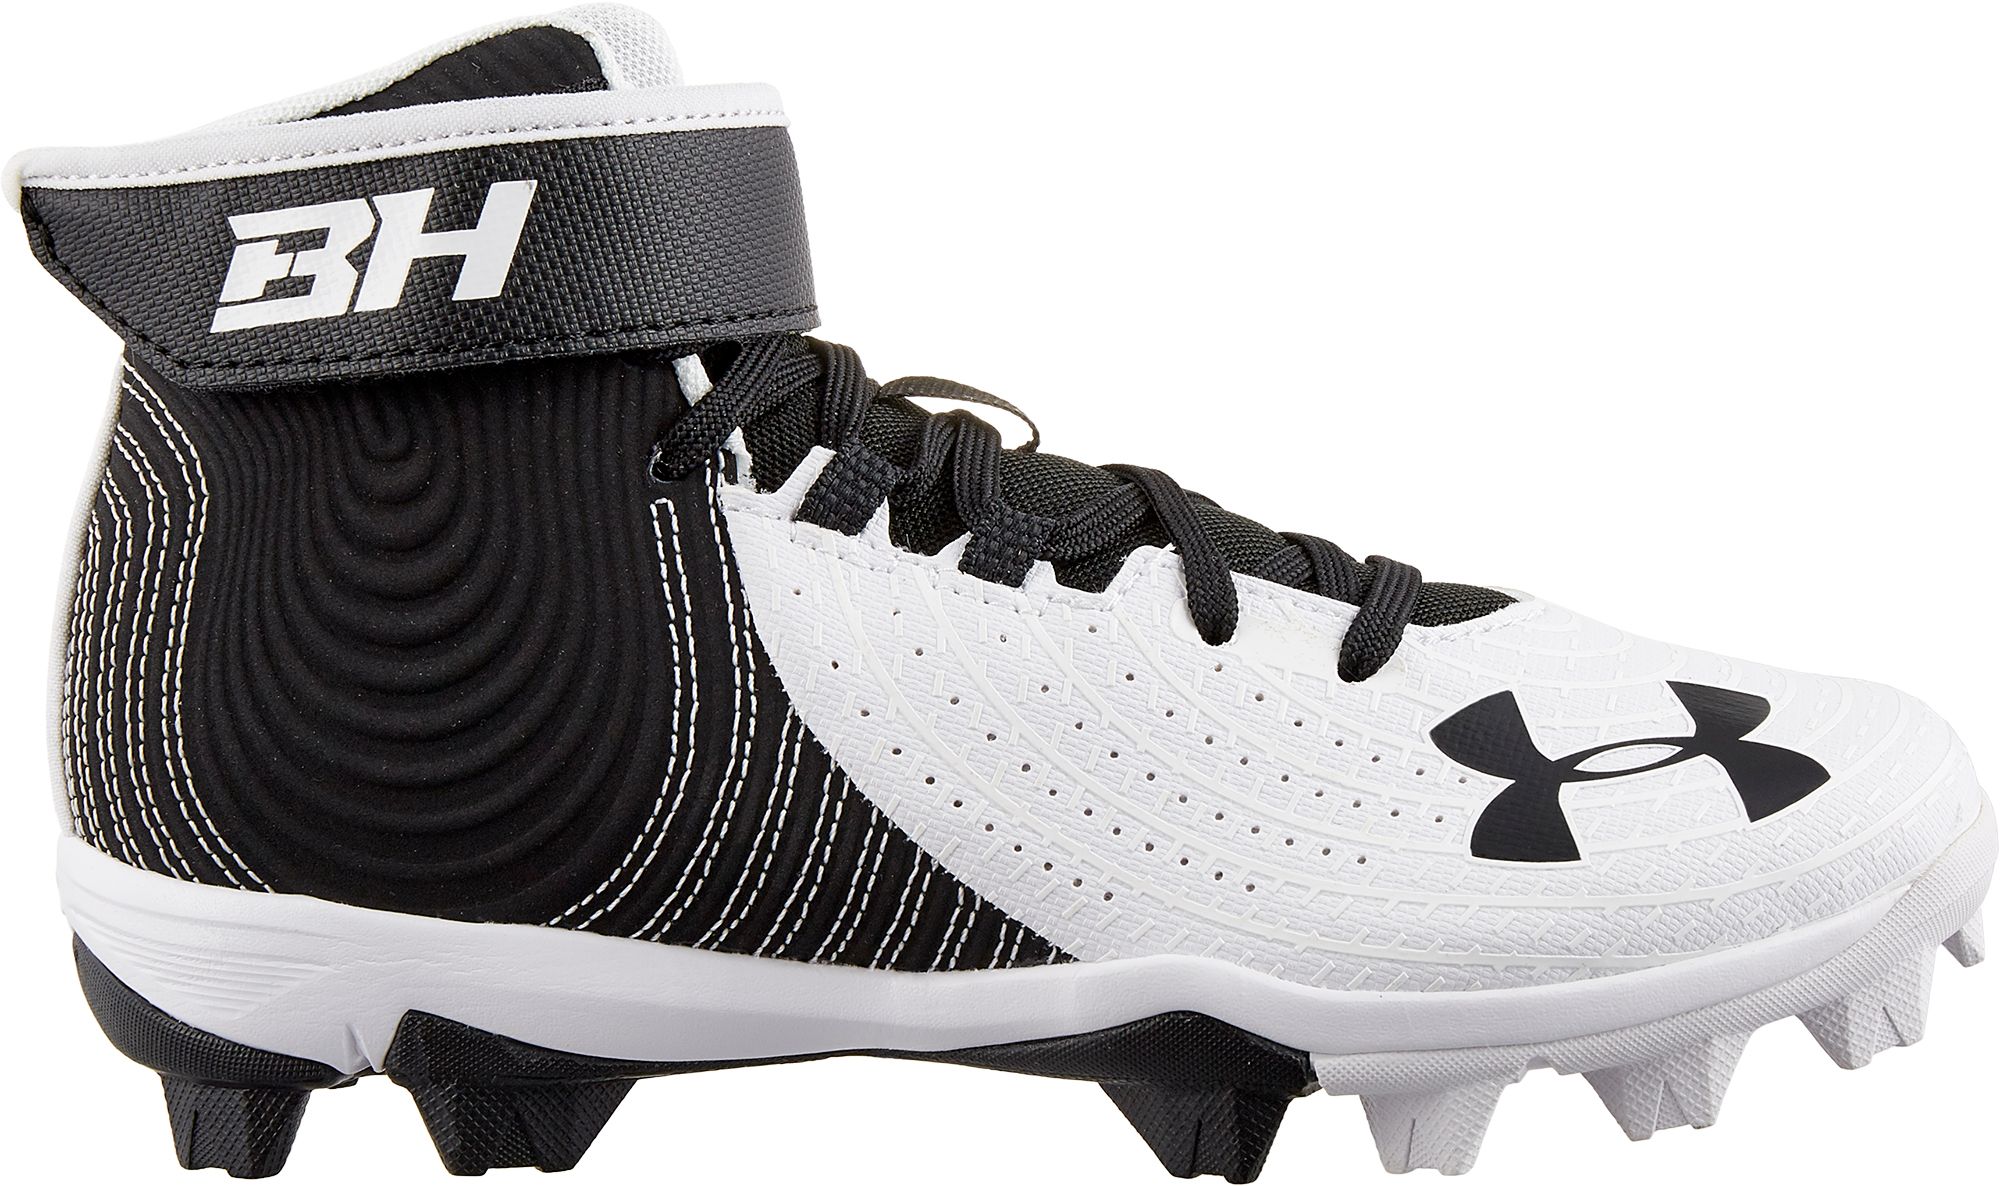 Under Armour Harper 5 Mid Rubber Molded Cleat 